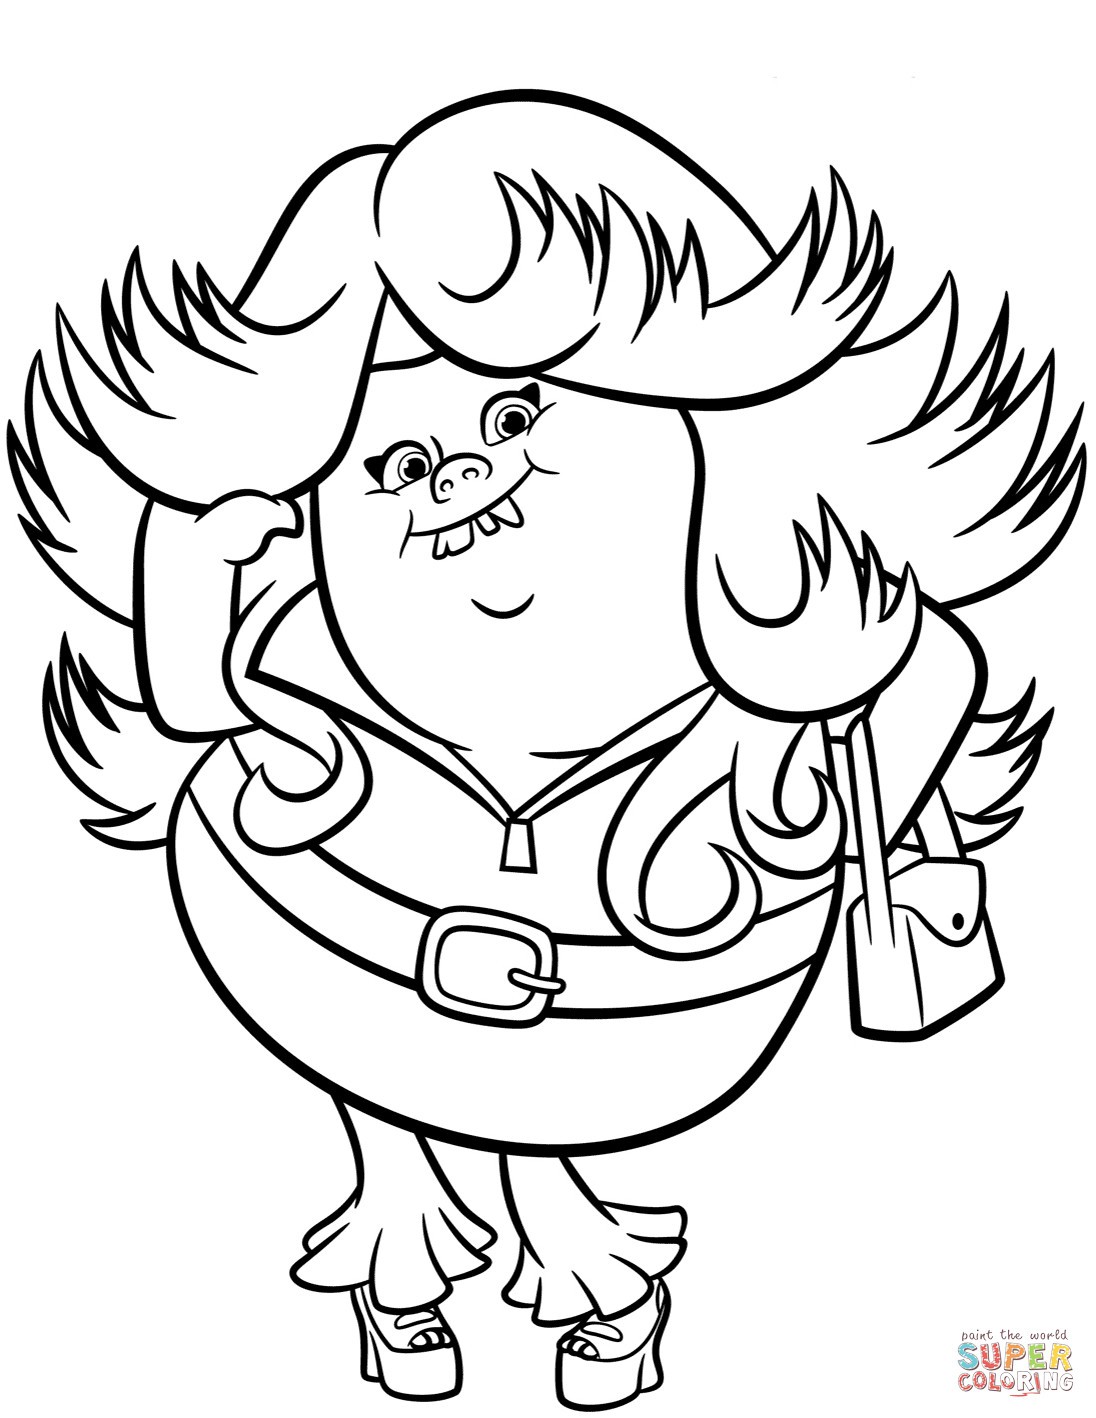 Lady Glitter Sparkles Trolls Coloring Pages